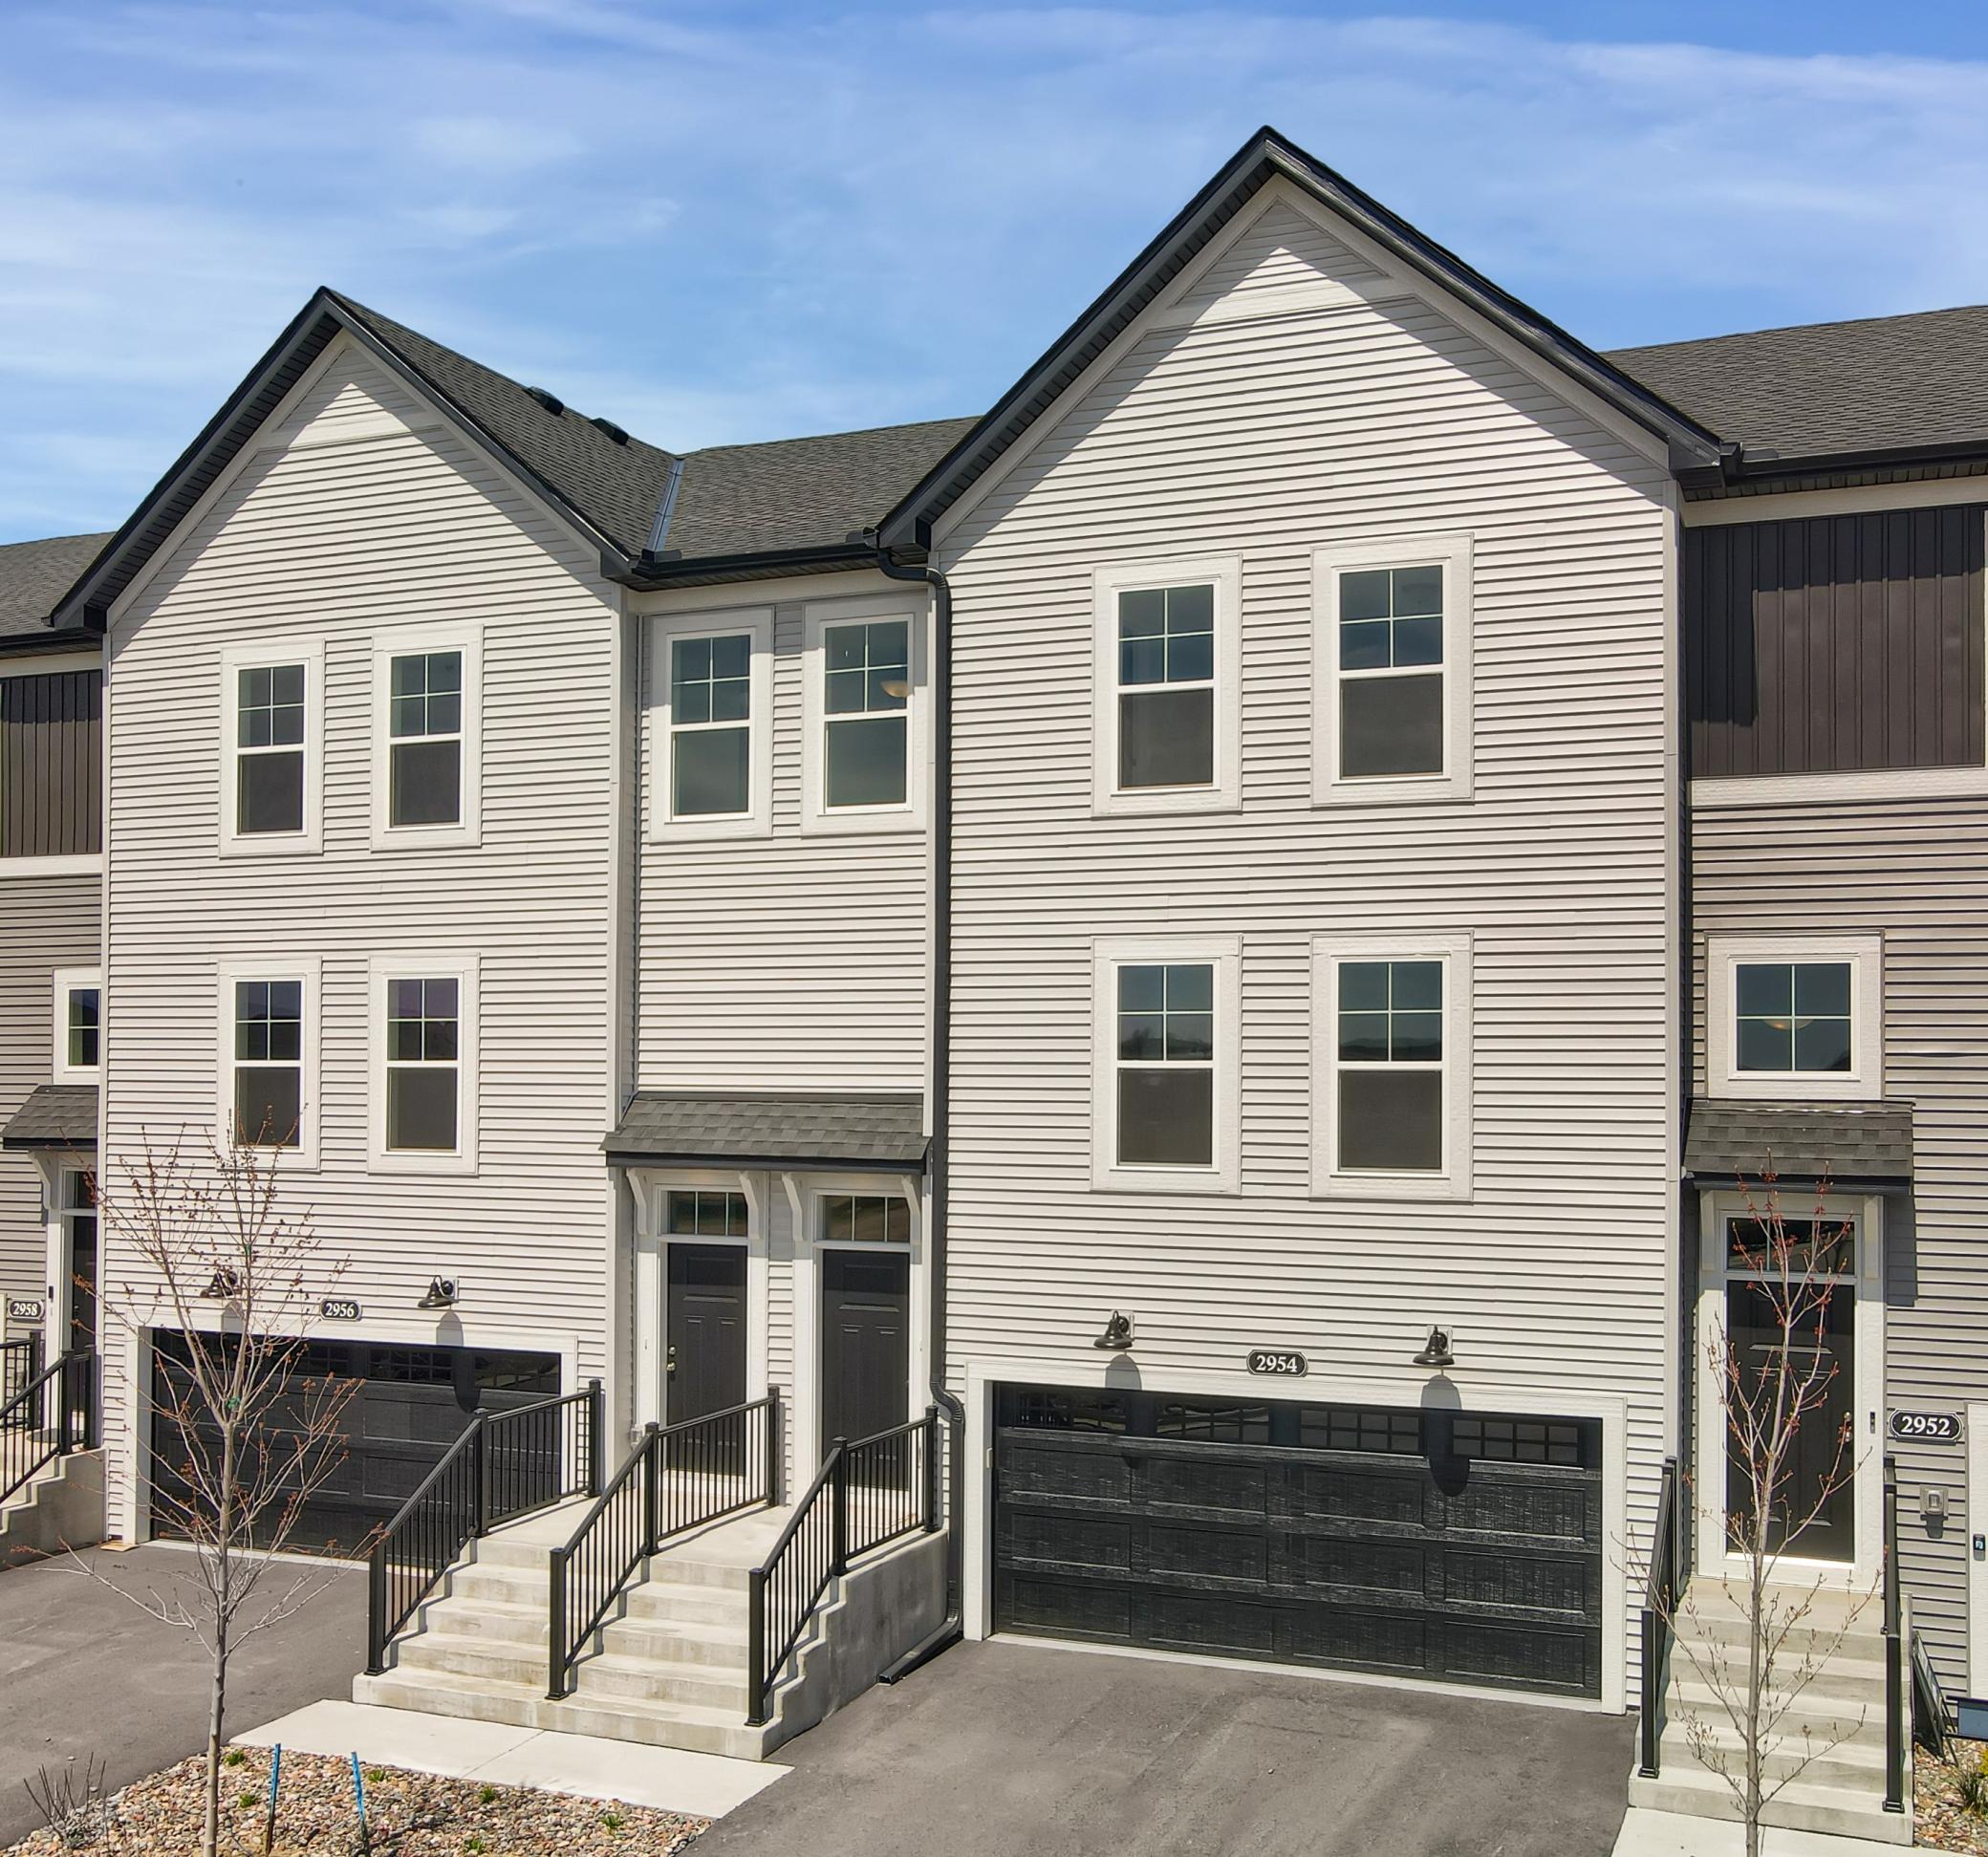 Welcome to the Park series of townhomes featuring spacious floorplans, finished rec rooms, and elevated interiors!